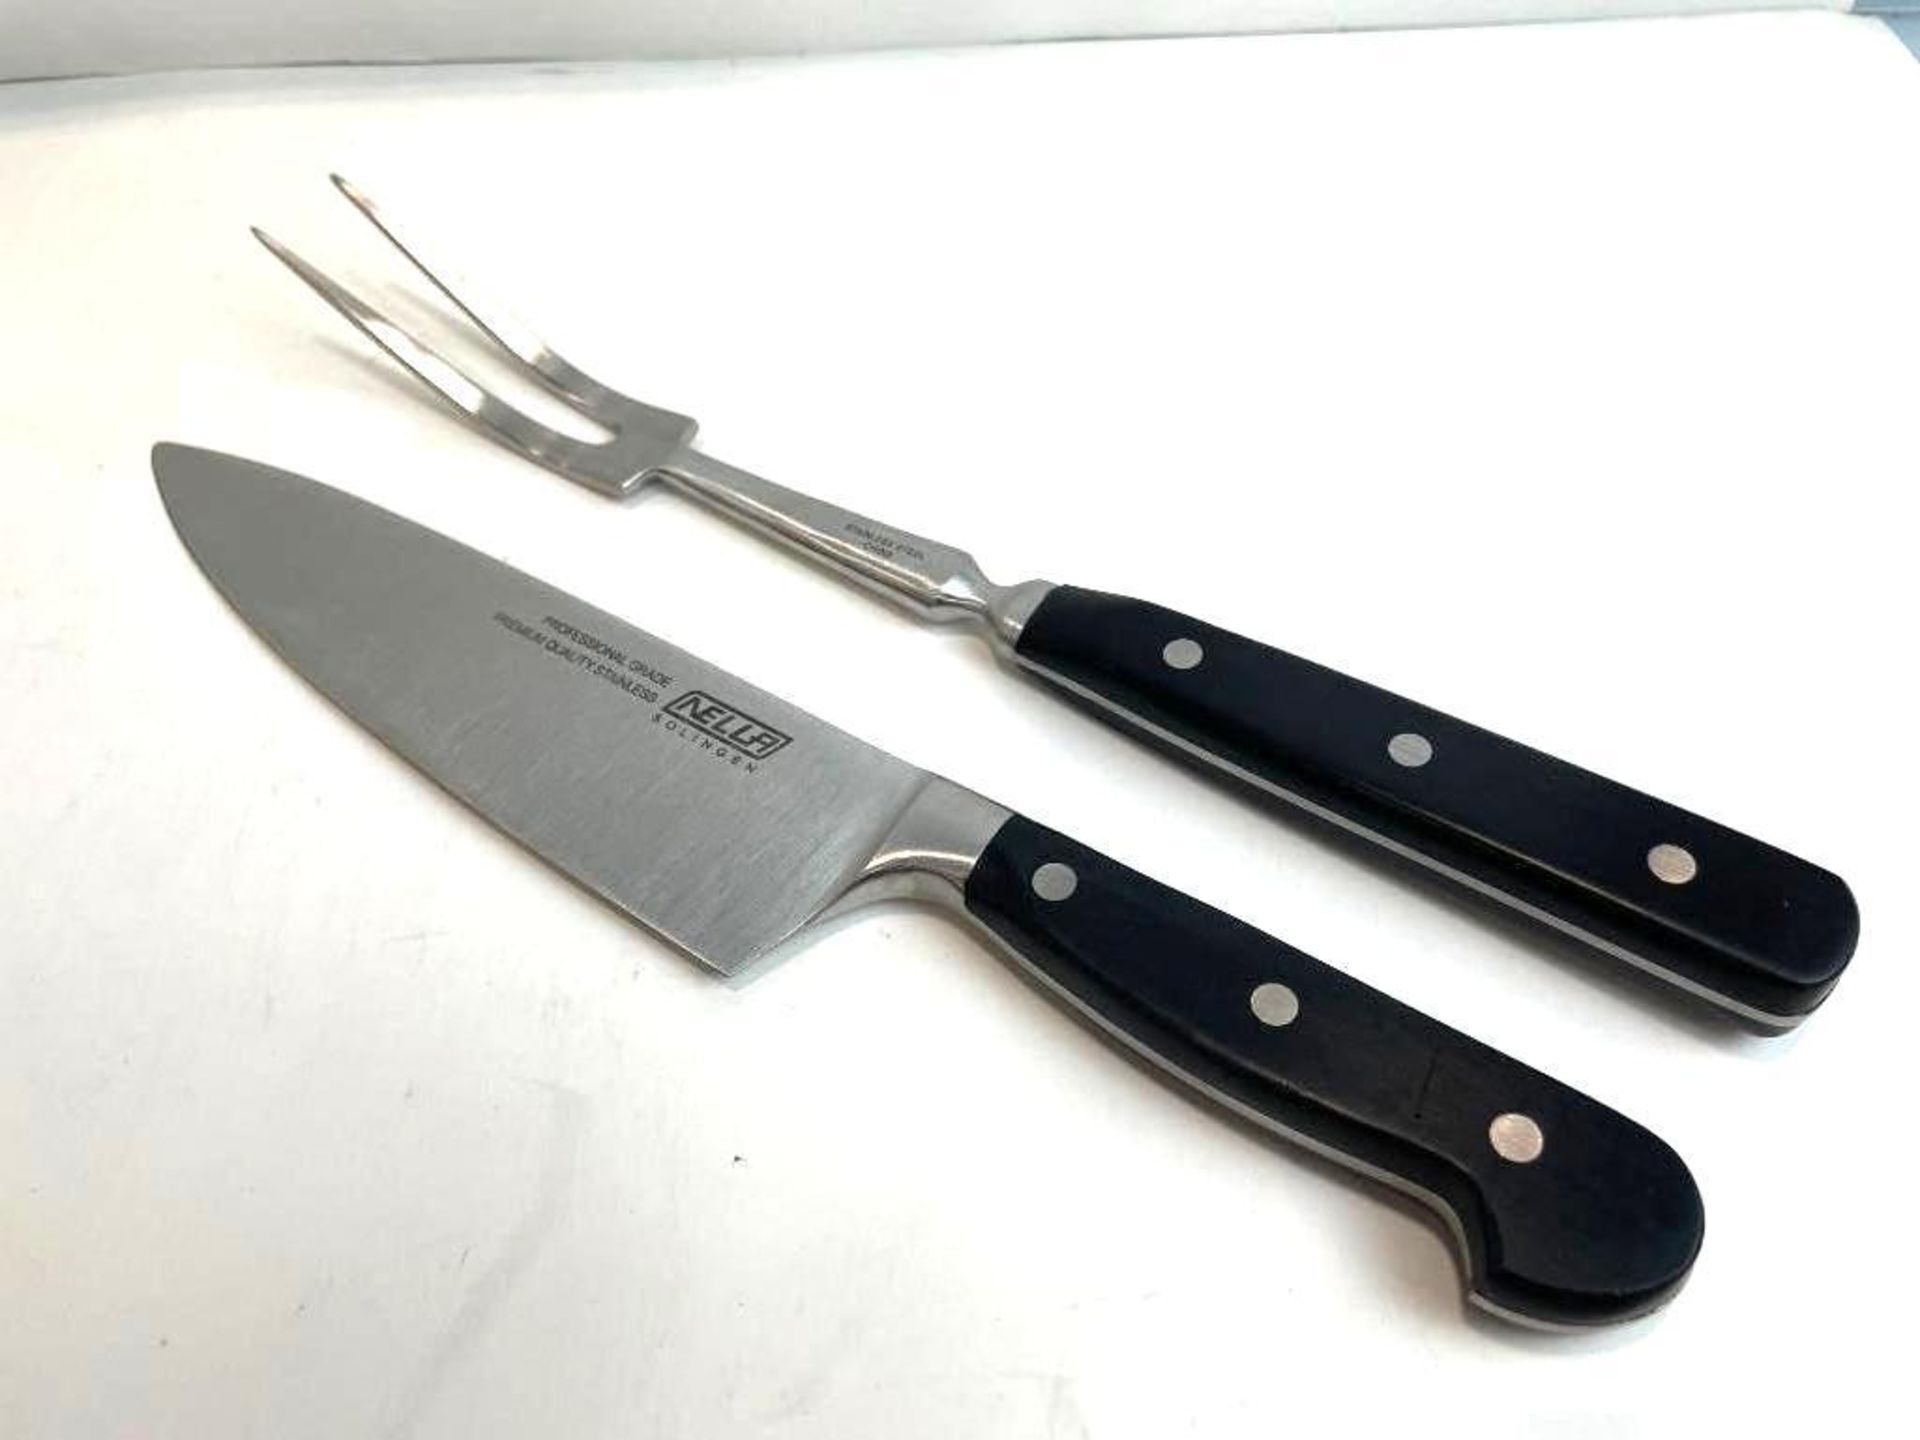 8" NELLA FORGED CHEF'S KNIFE & 13.5" STAINLESS STEEL COOK'S FORK